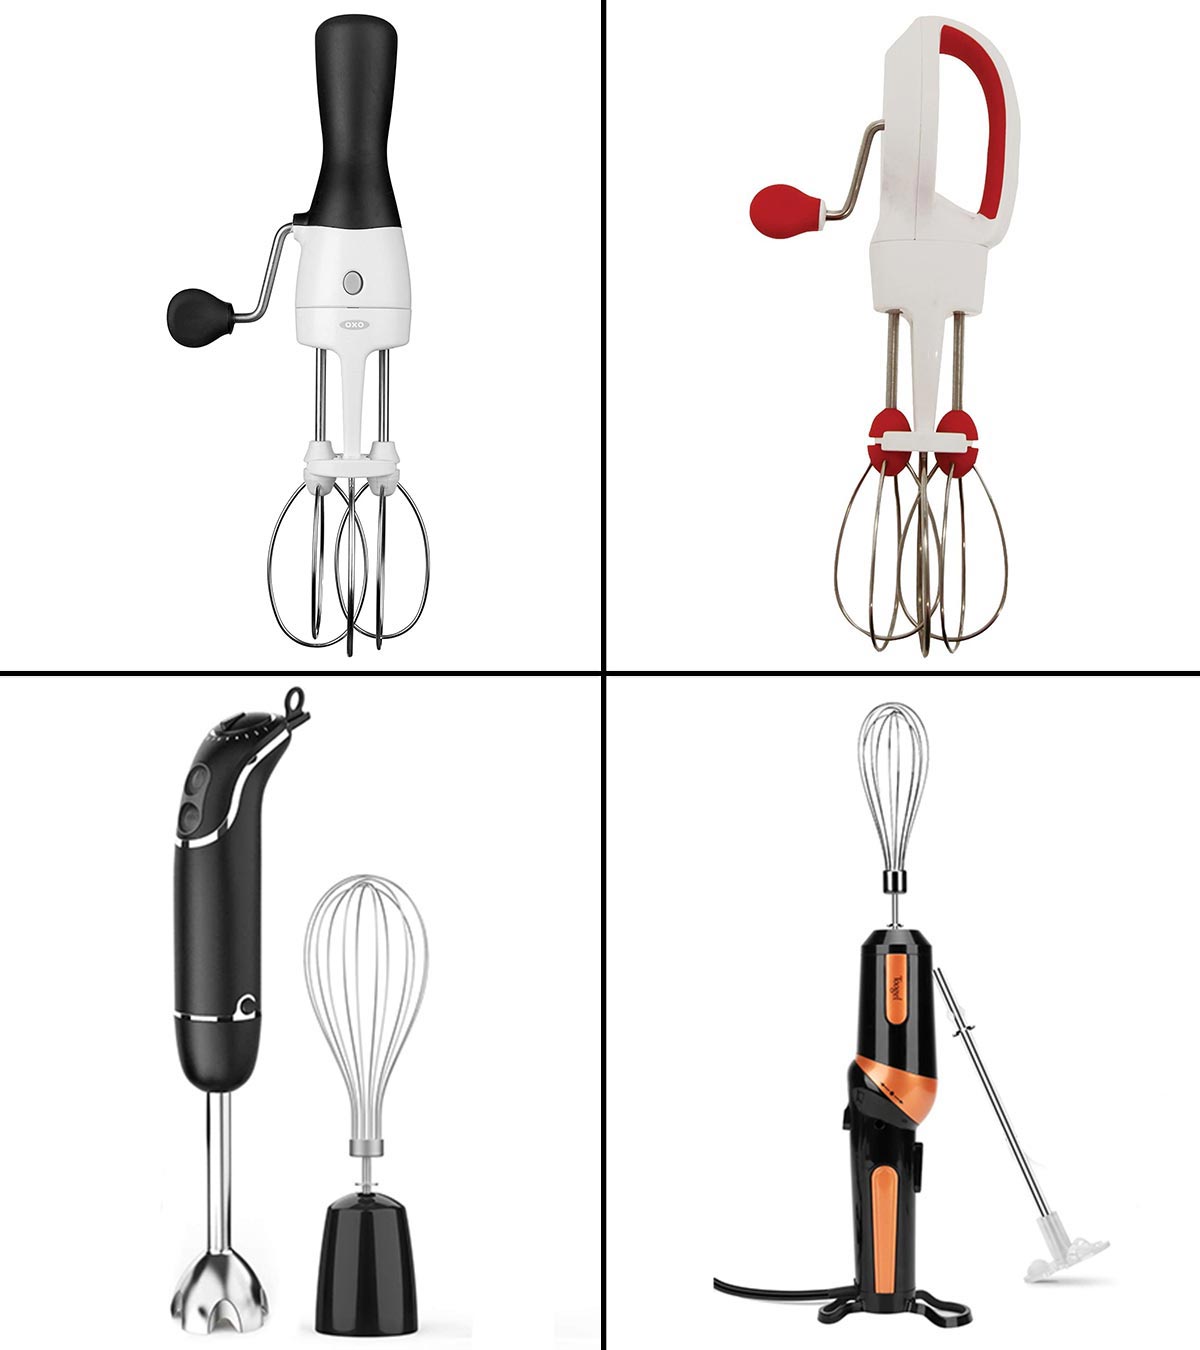 difference - Does anyone say electric egg beater? - English Language  Learners Stack Exchange